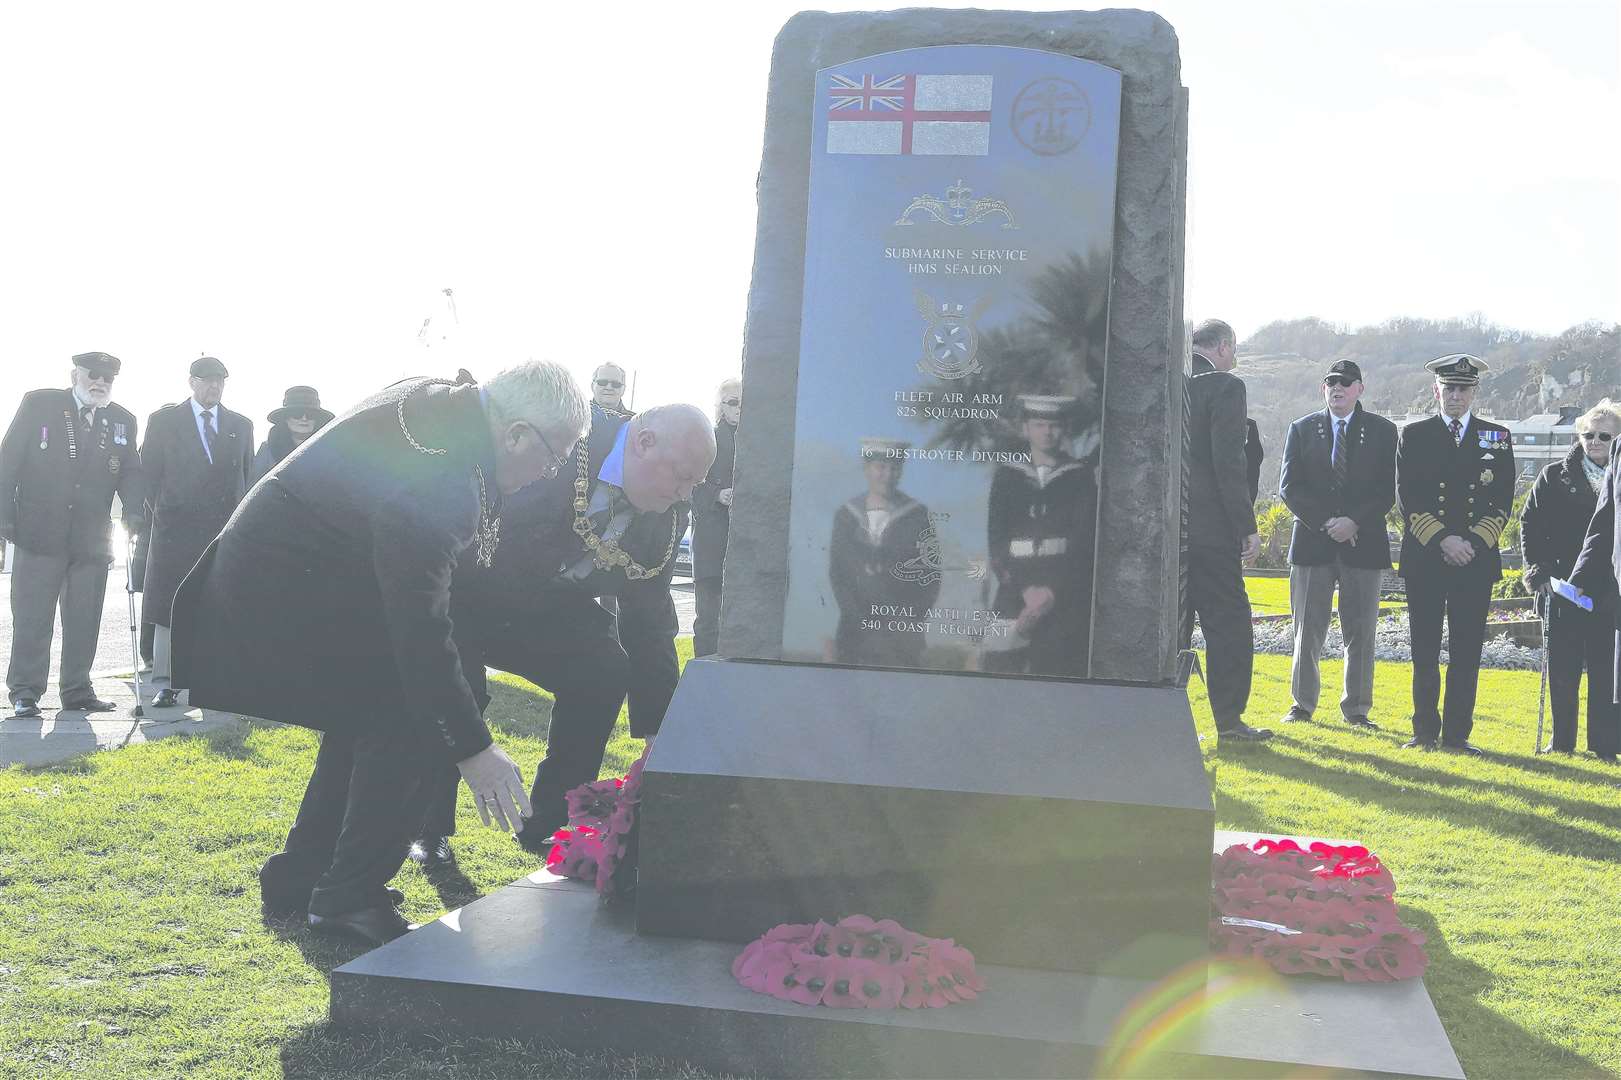 The Channel Dash Association hold a memorial in Kent every year to make the raiders